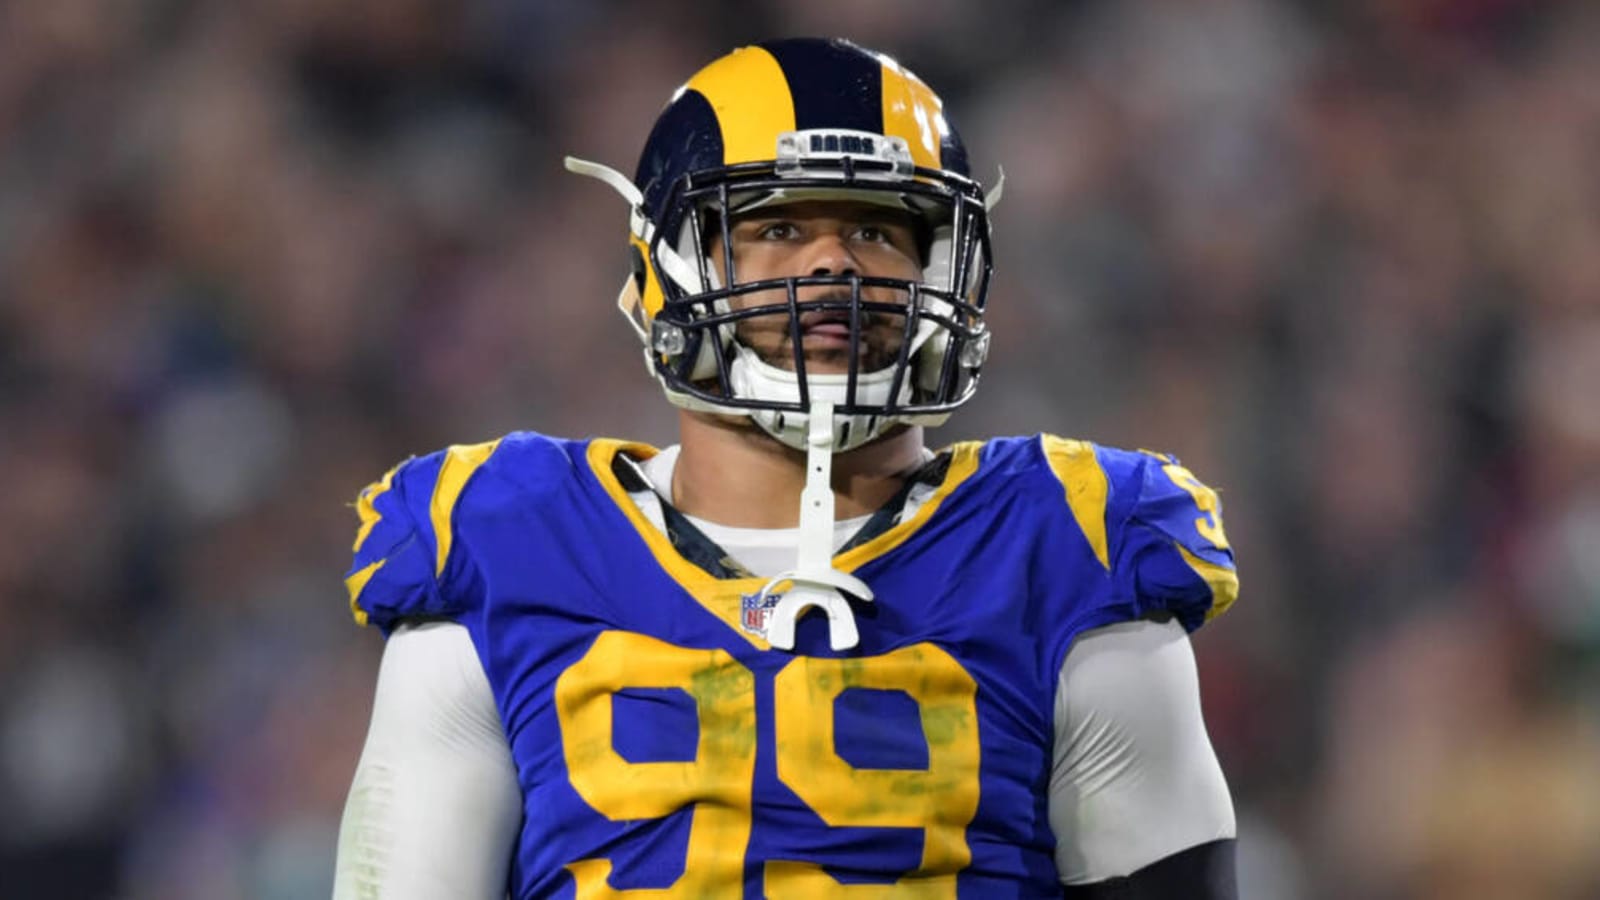 After Donald's retirement, one Rams player remains from STL